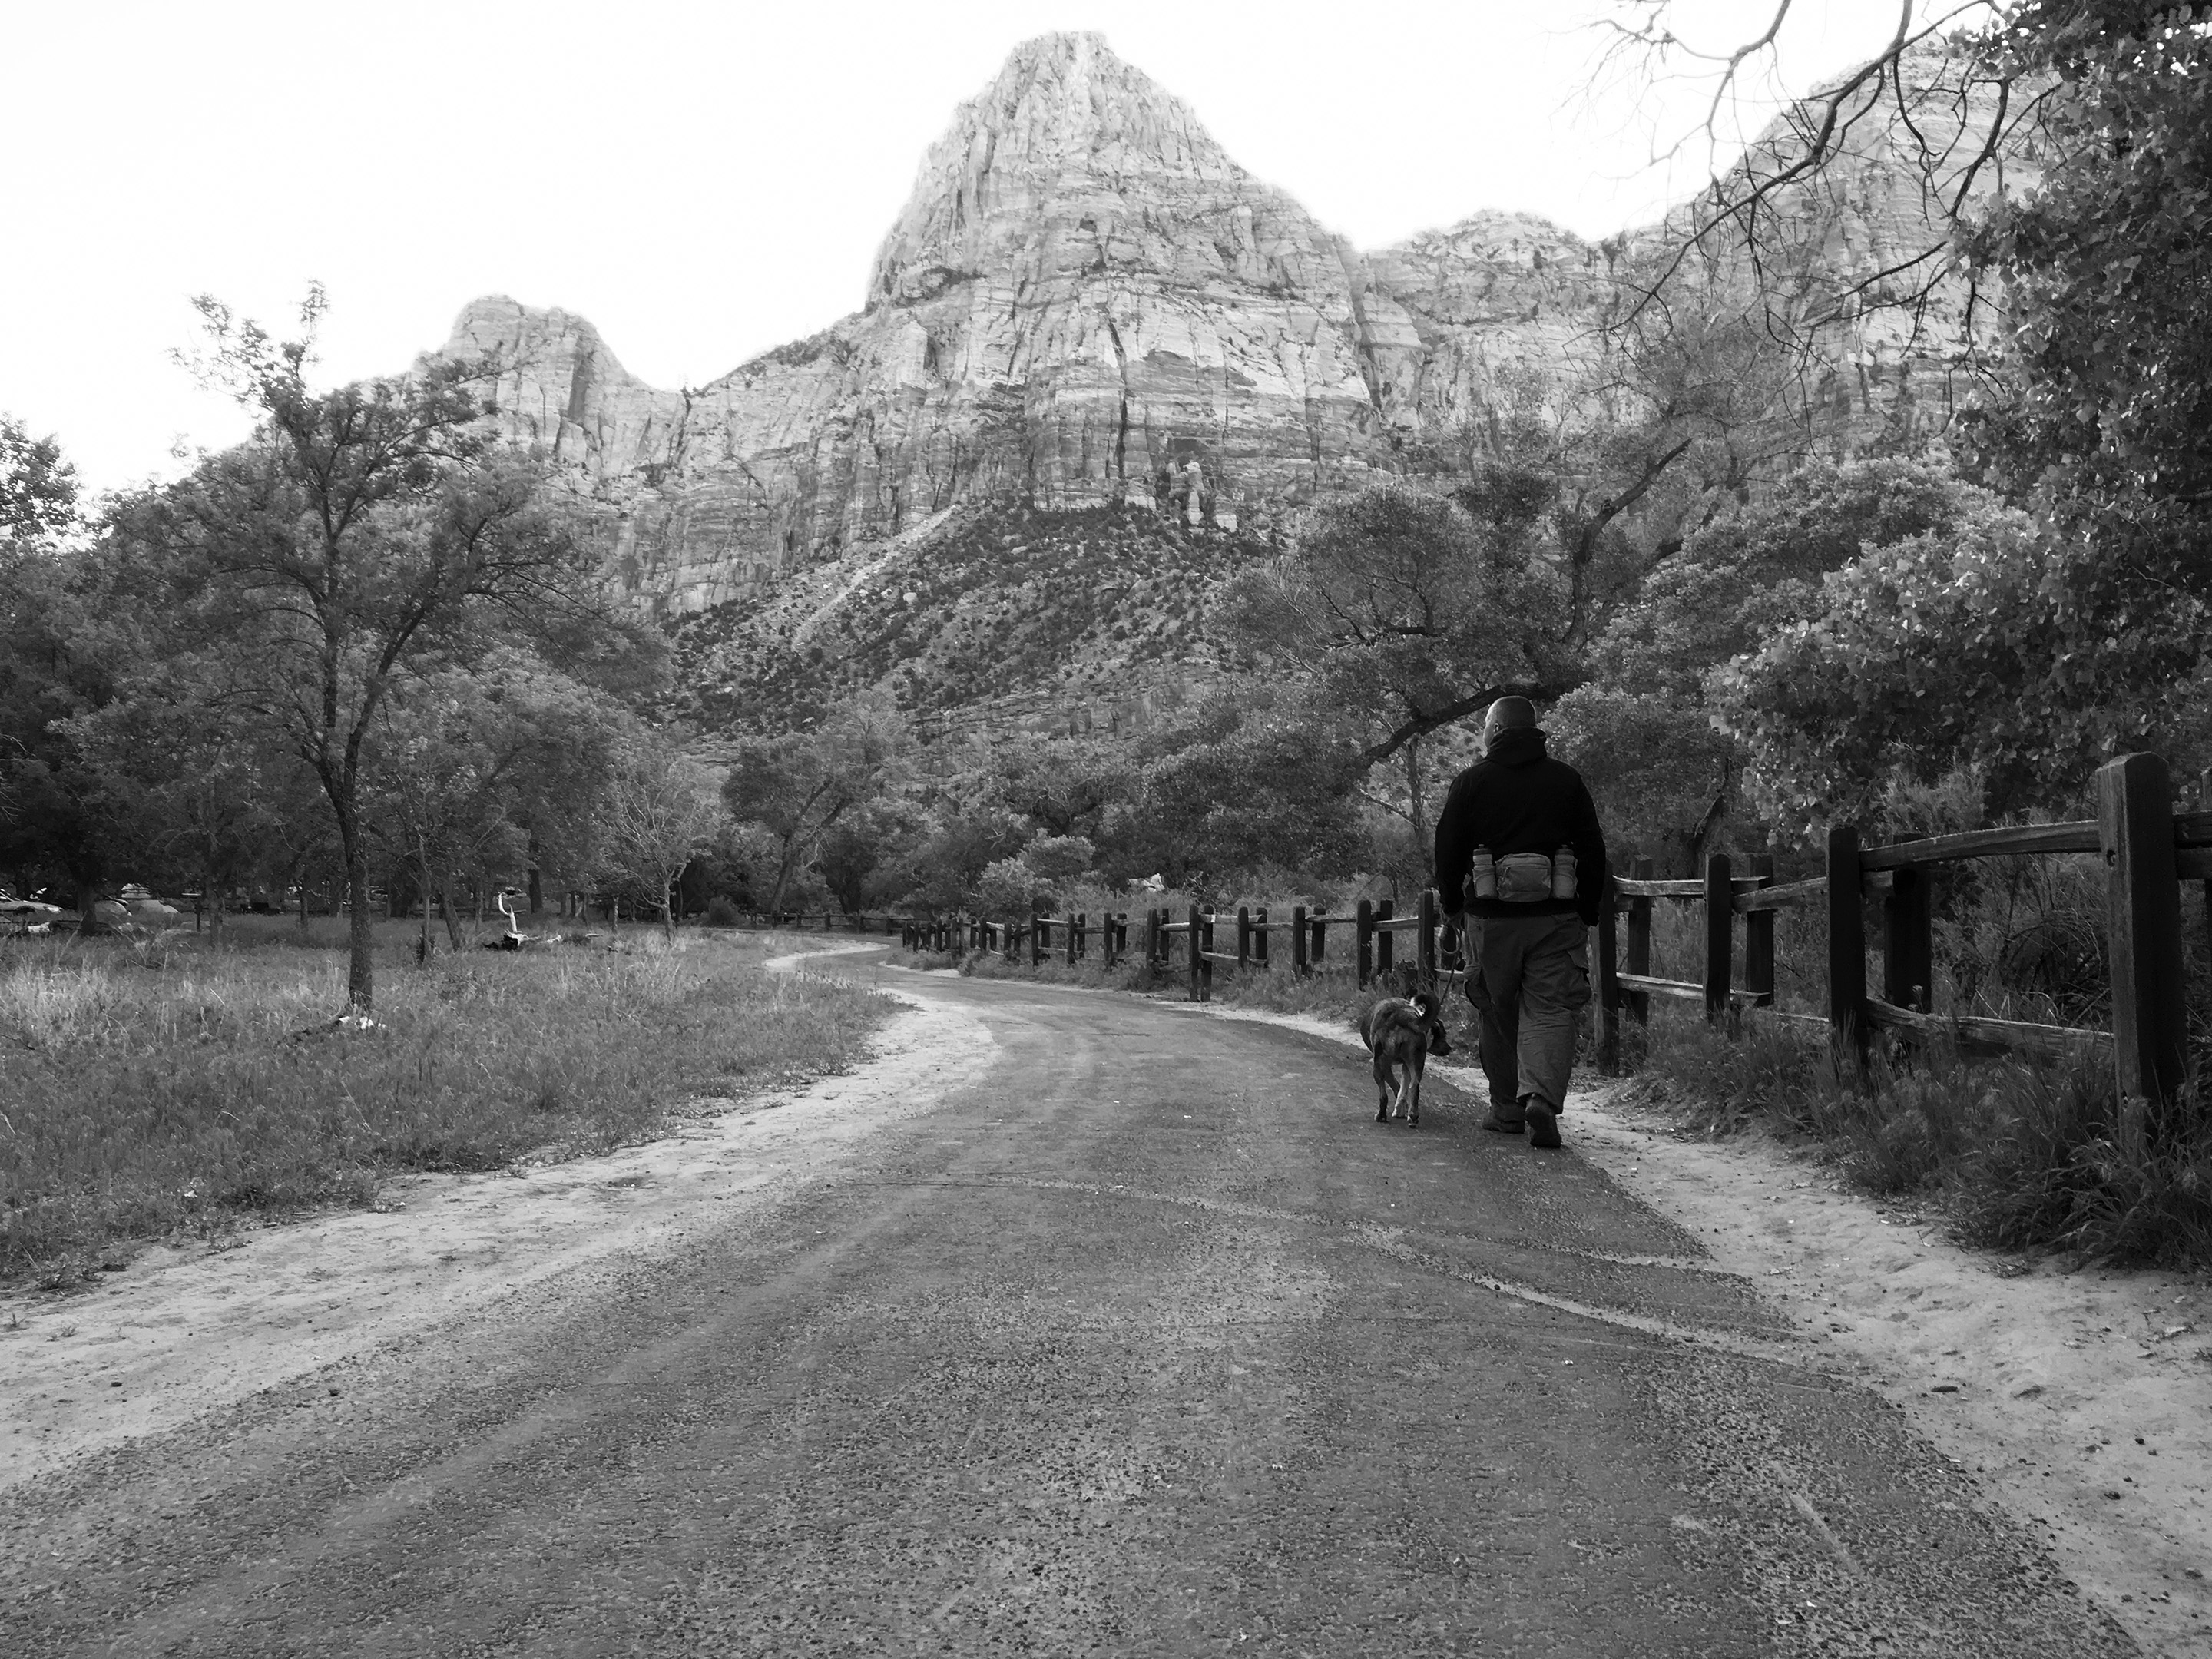 Chilly morning at Zion